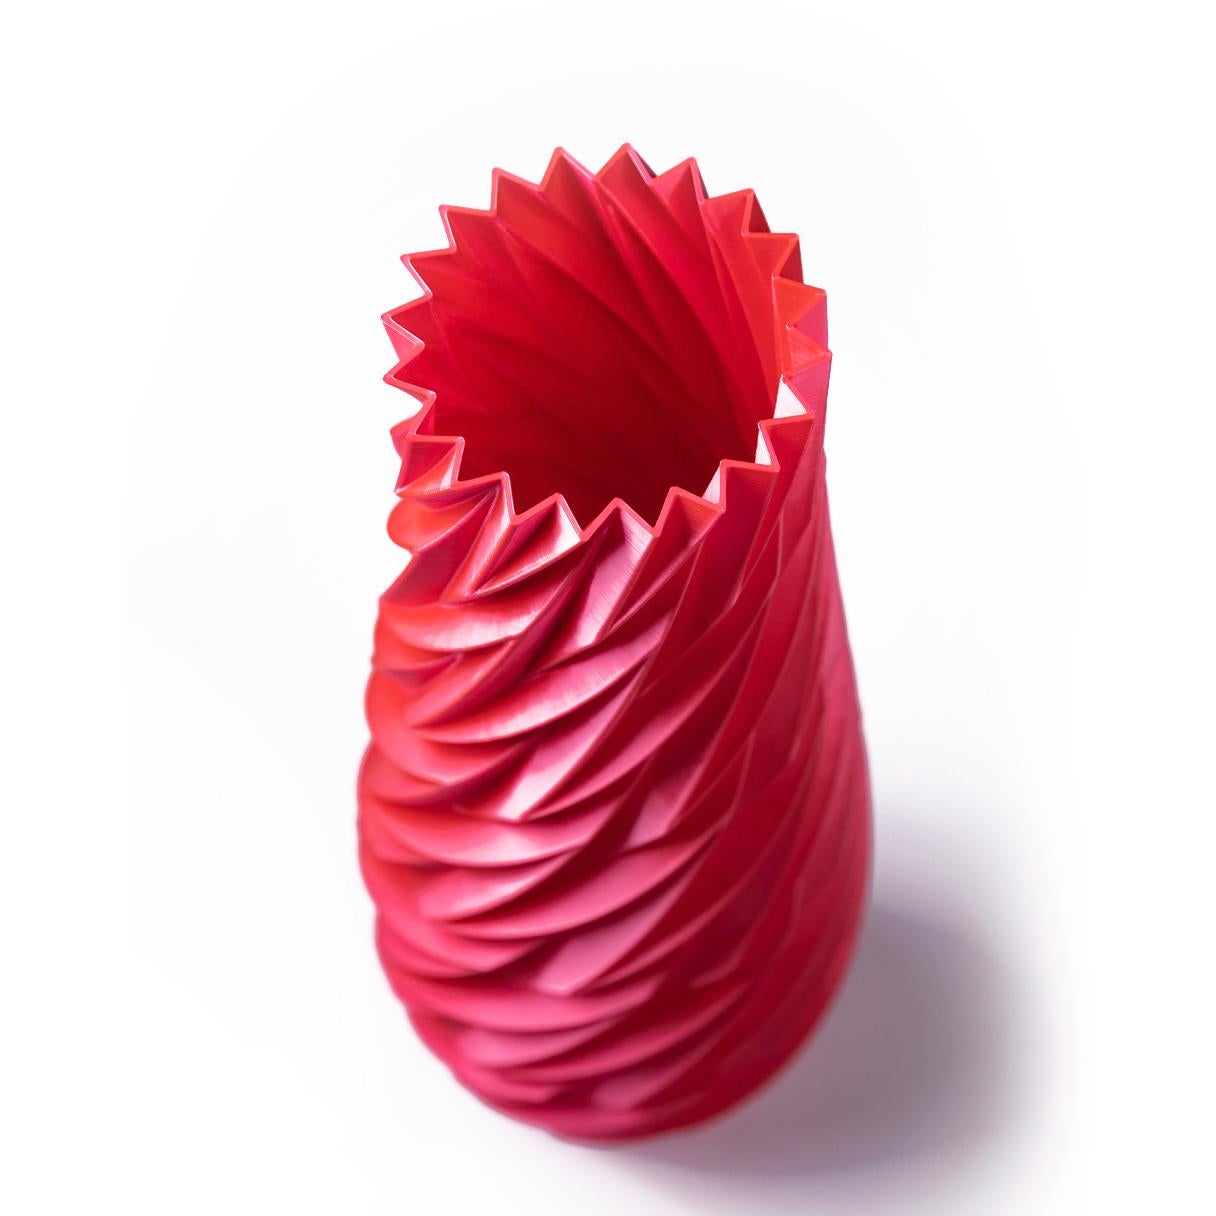 Vase-sculpture by DygoDesign

The jagged regularity of the profile gives life to a sculpture with a majestic, solid structure and protagonist of the space it occupies.

The absolute dynamism and depth of the structure combined with the charm of the